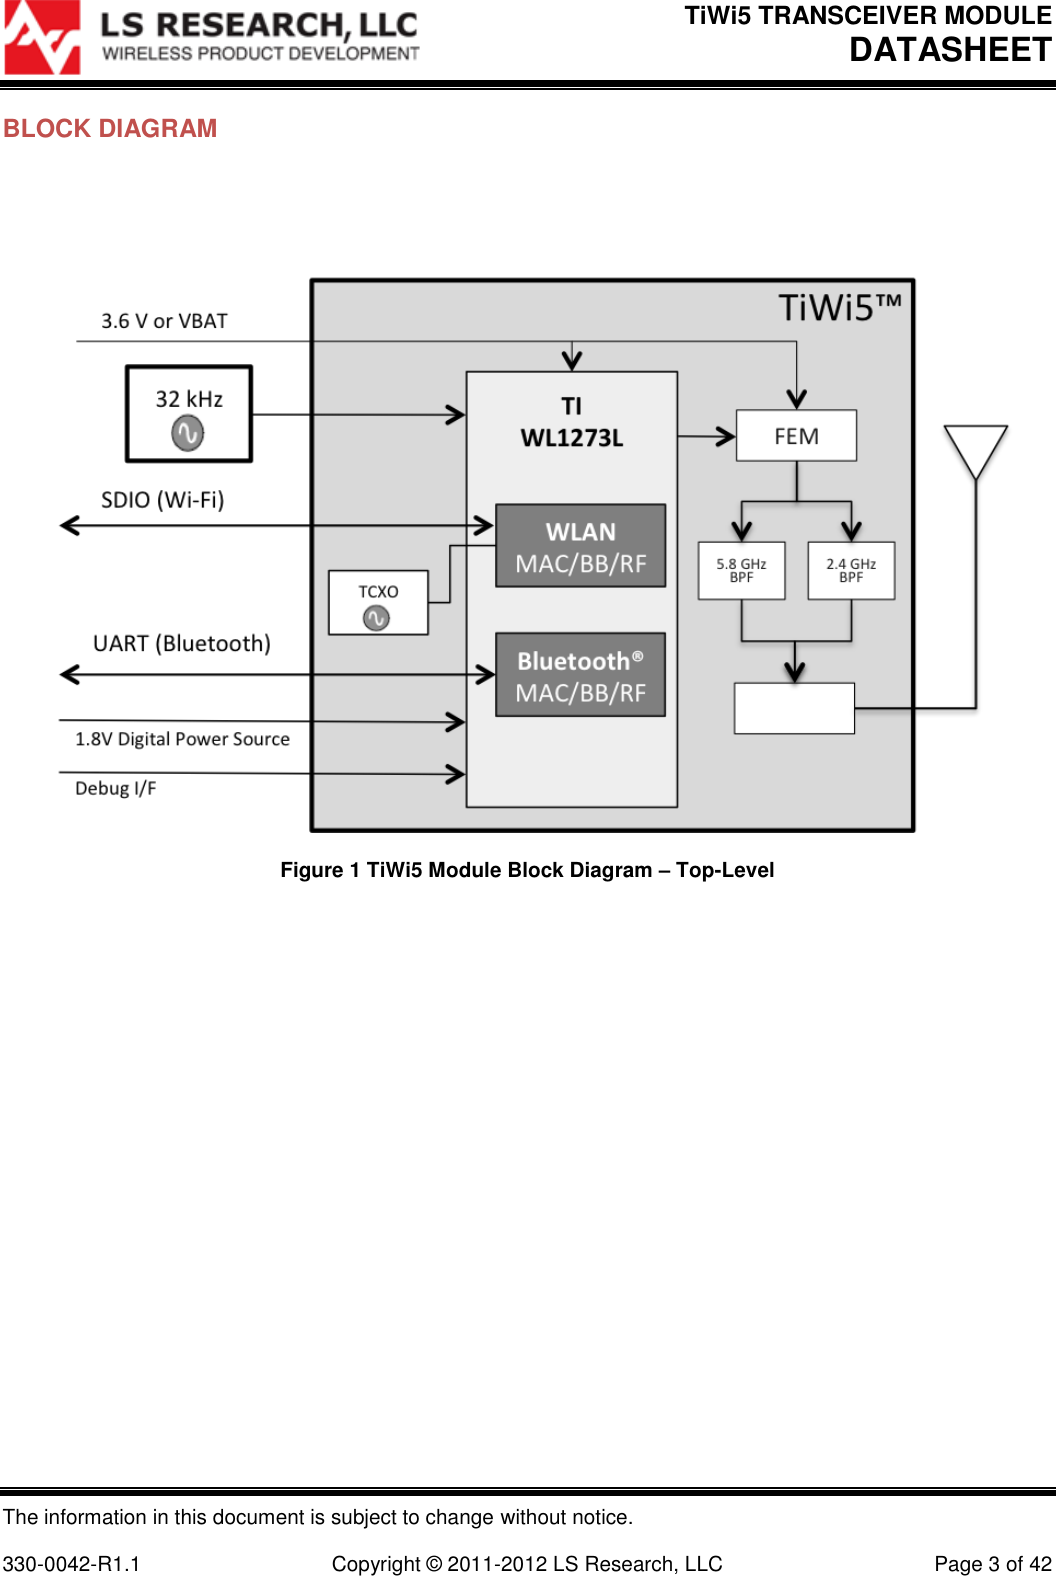 TiWi5 TRANSCEIVER MODULE DATASHEET  The information in this document is subject to change without notice.  330-0042-R1.1    Copyright © 2011-2012 LS Research, LLC  Page 3 of 42 BLOCK DIAGRAM    Figure 1 TiWi5 Module Block Diagram – Top-Level    